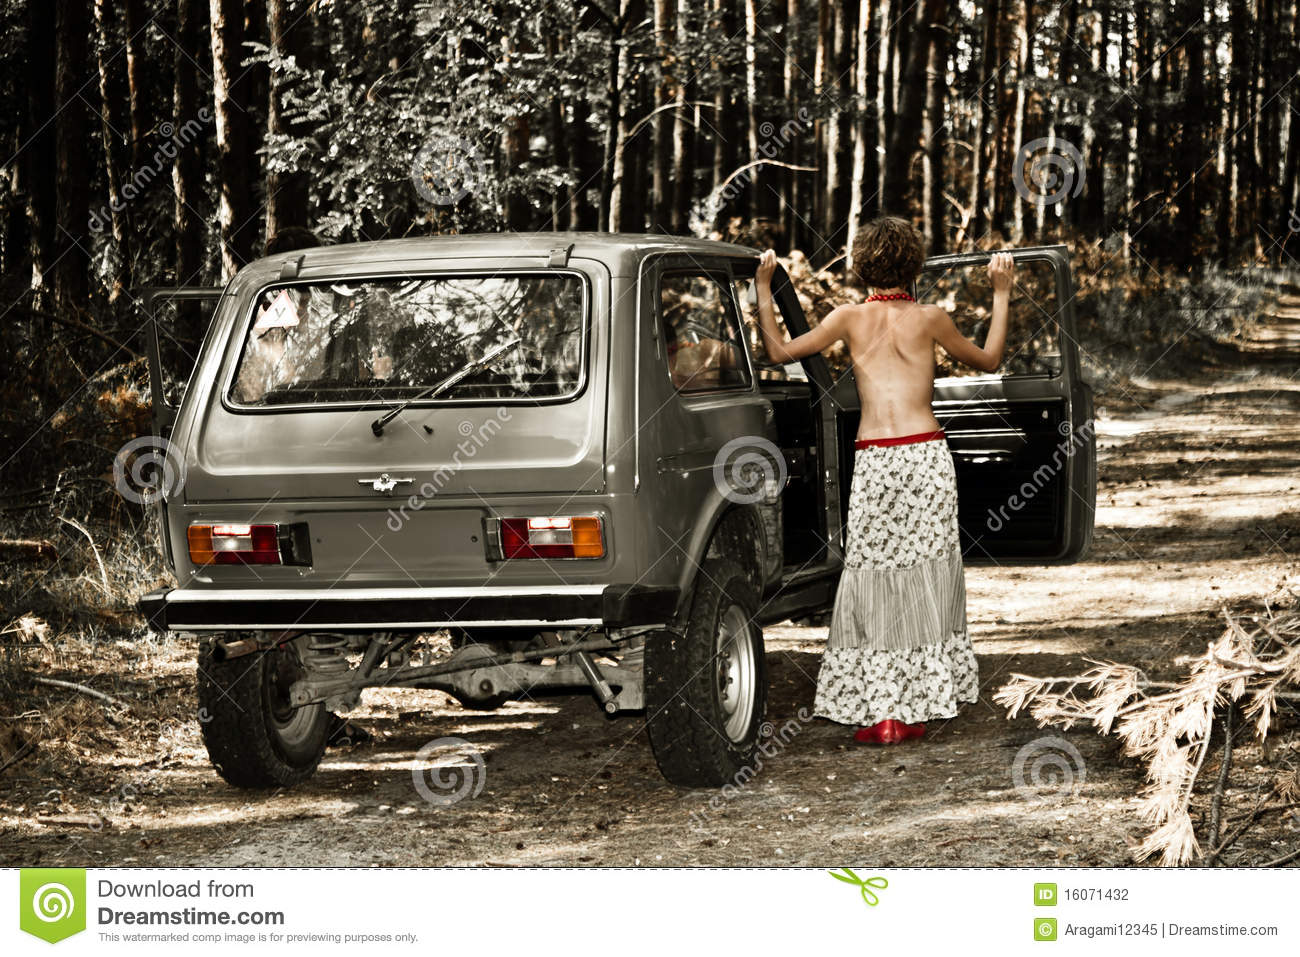 Vintage topless girl in front of a Lada Niva.